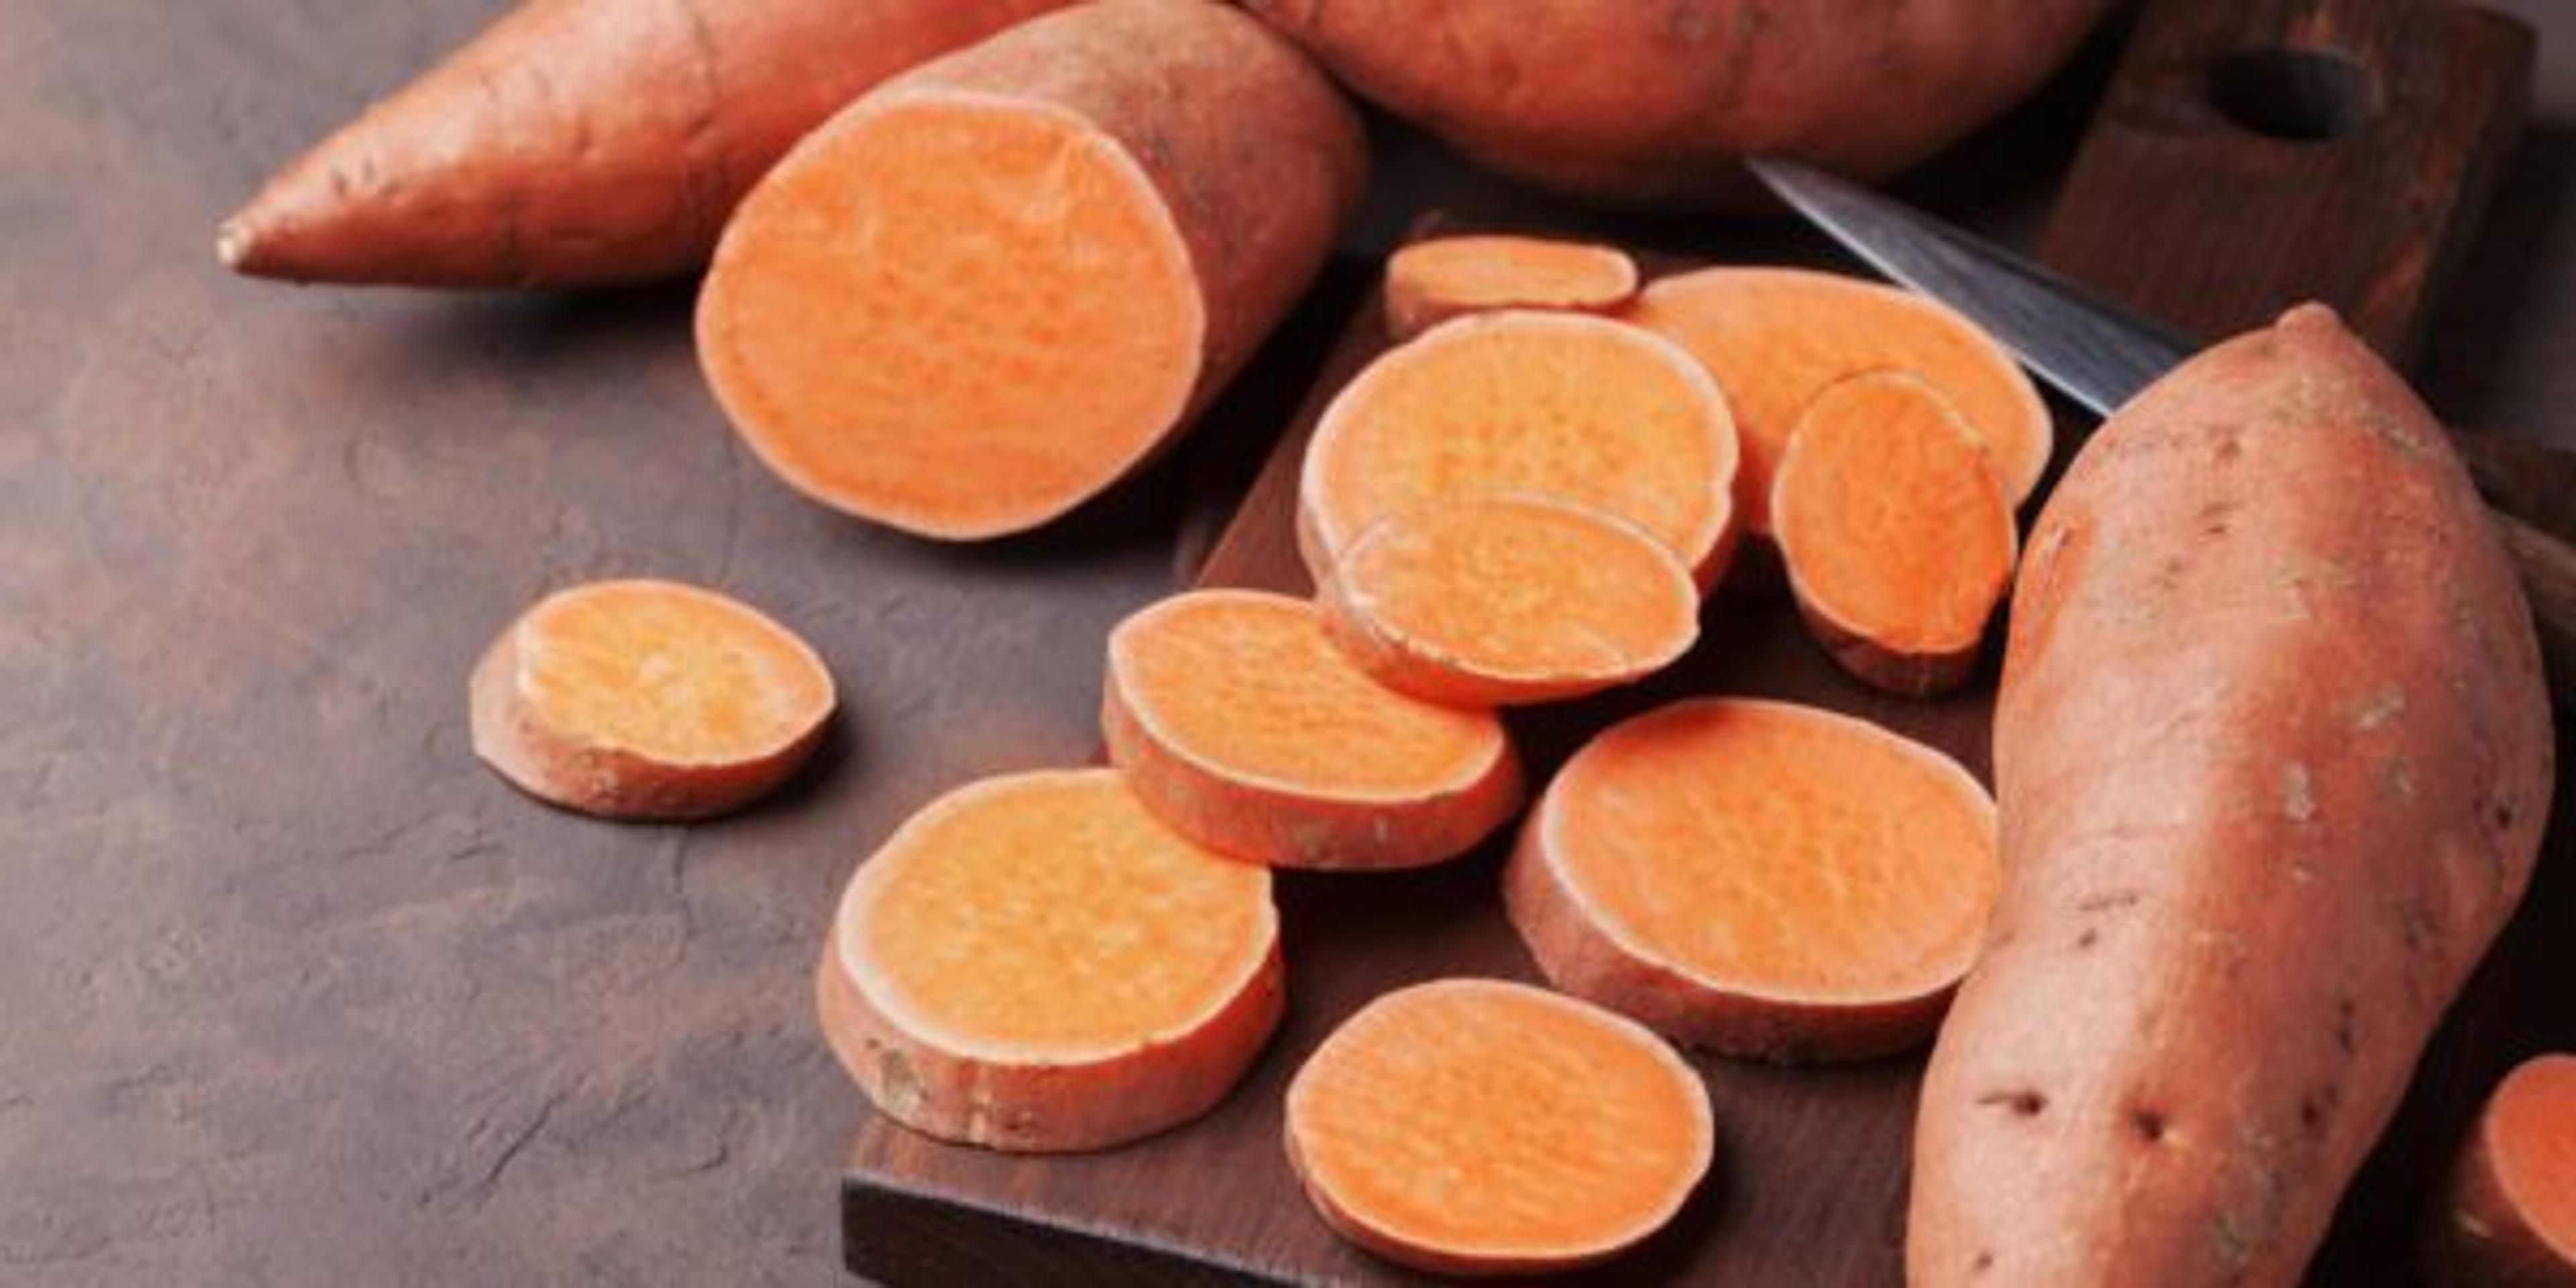 Organic sweet potatoes whole and sliced on wooden kitchen board.